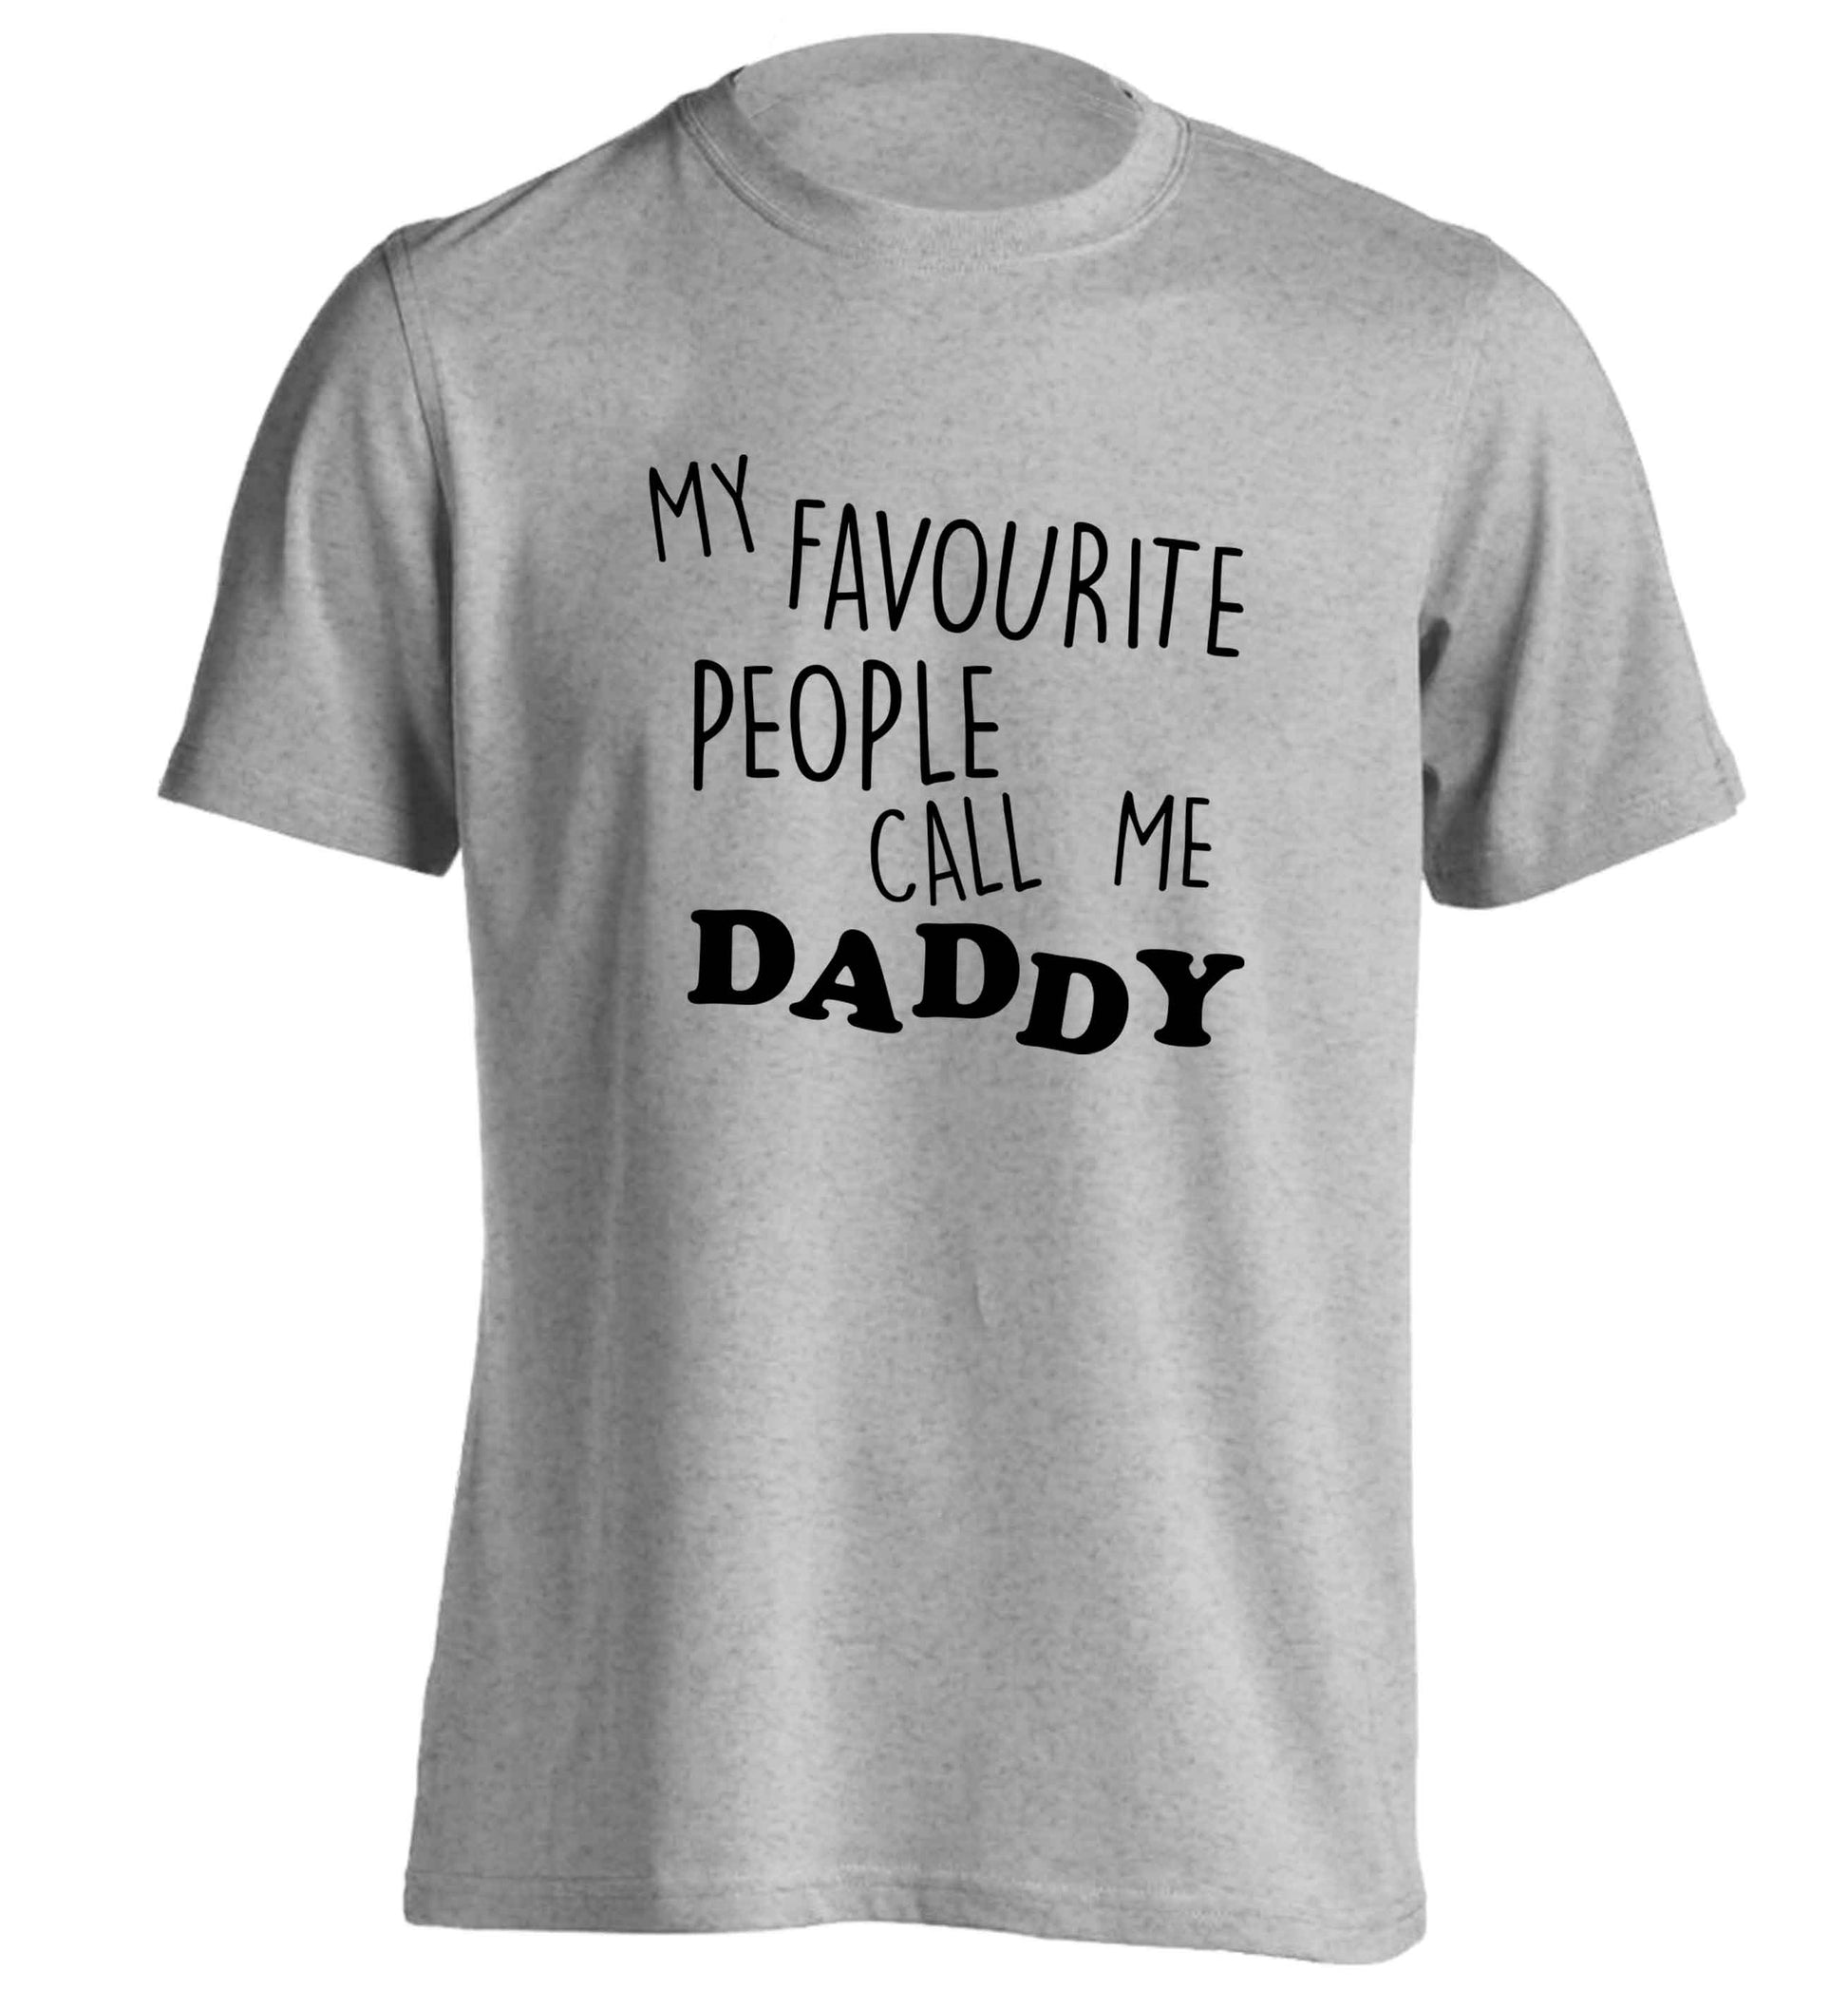 My favourite people call me daddy adults unisex grey Tshirt 2XL